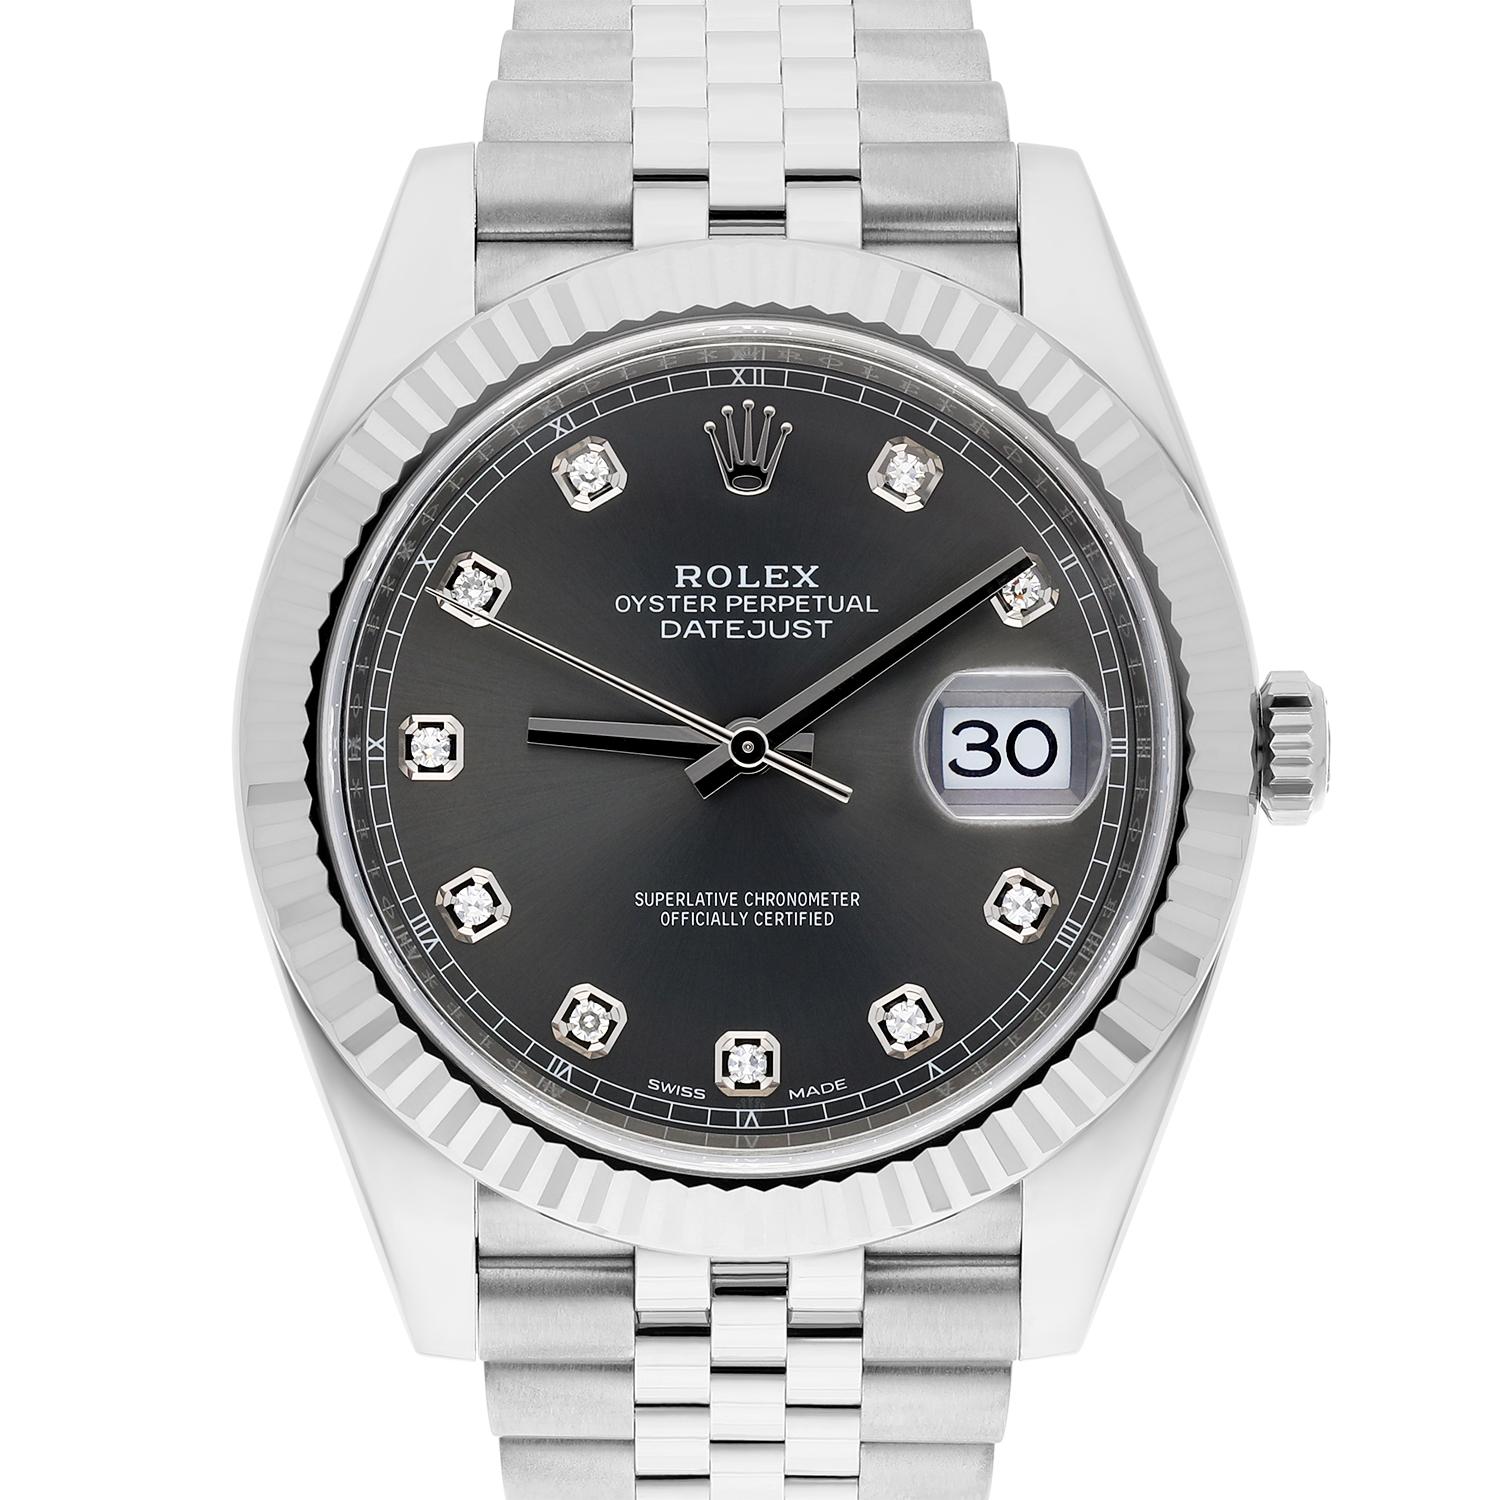 MINT with no signs of wear Rolex Datejust 41mm 126334 Fluted Bezel Rhodium Diamond Dial Jubilee Bracelet Complete

This watch has been professionally polished, serviced and is in excellent overall condition. There are absolutely no visible scratches